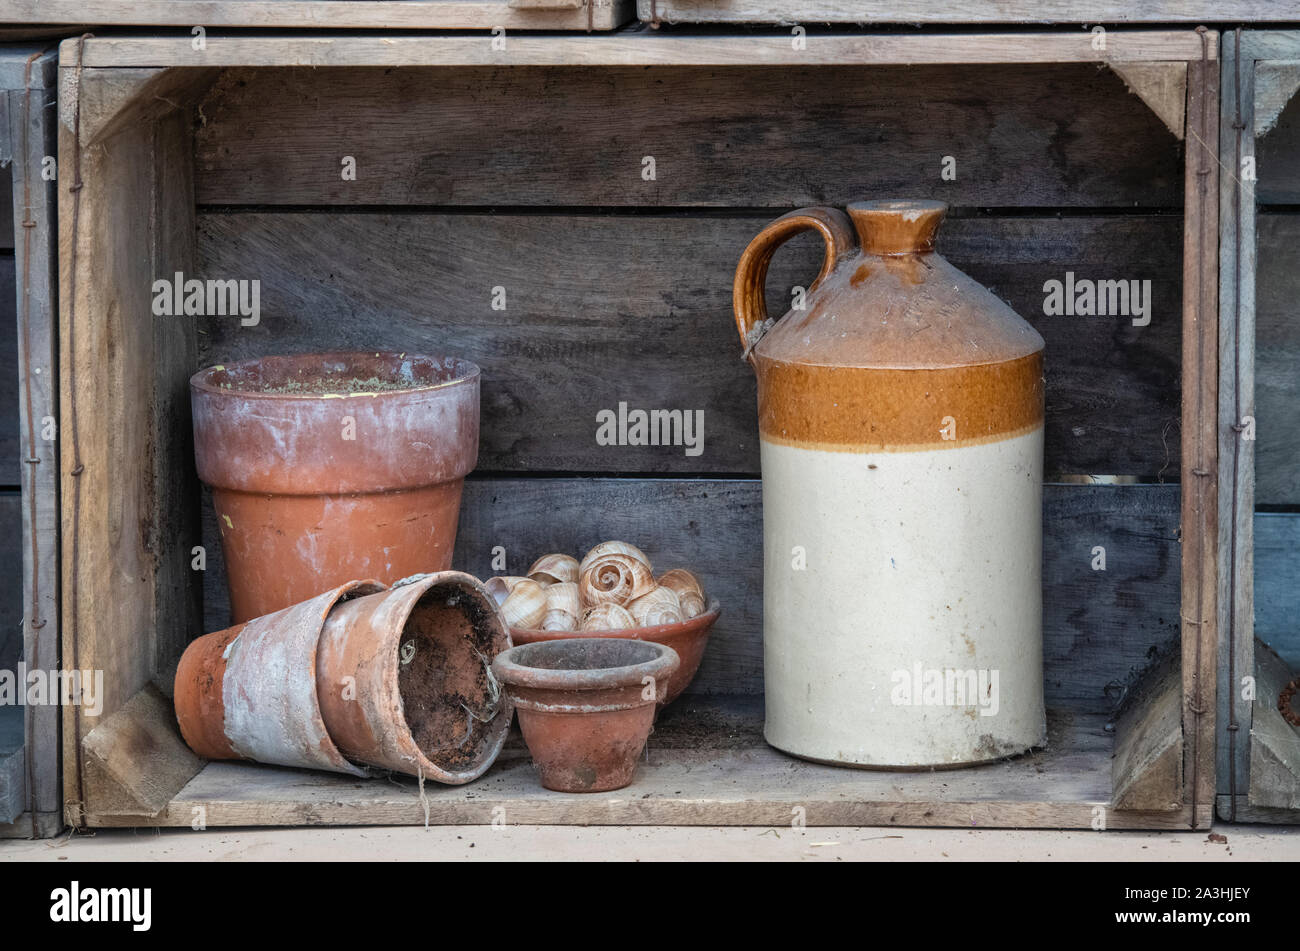 Stoneware jar and terracotta plant pots in a wooden crate shelf display. UK Stock Photo